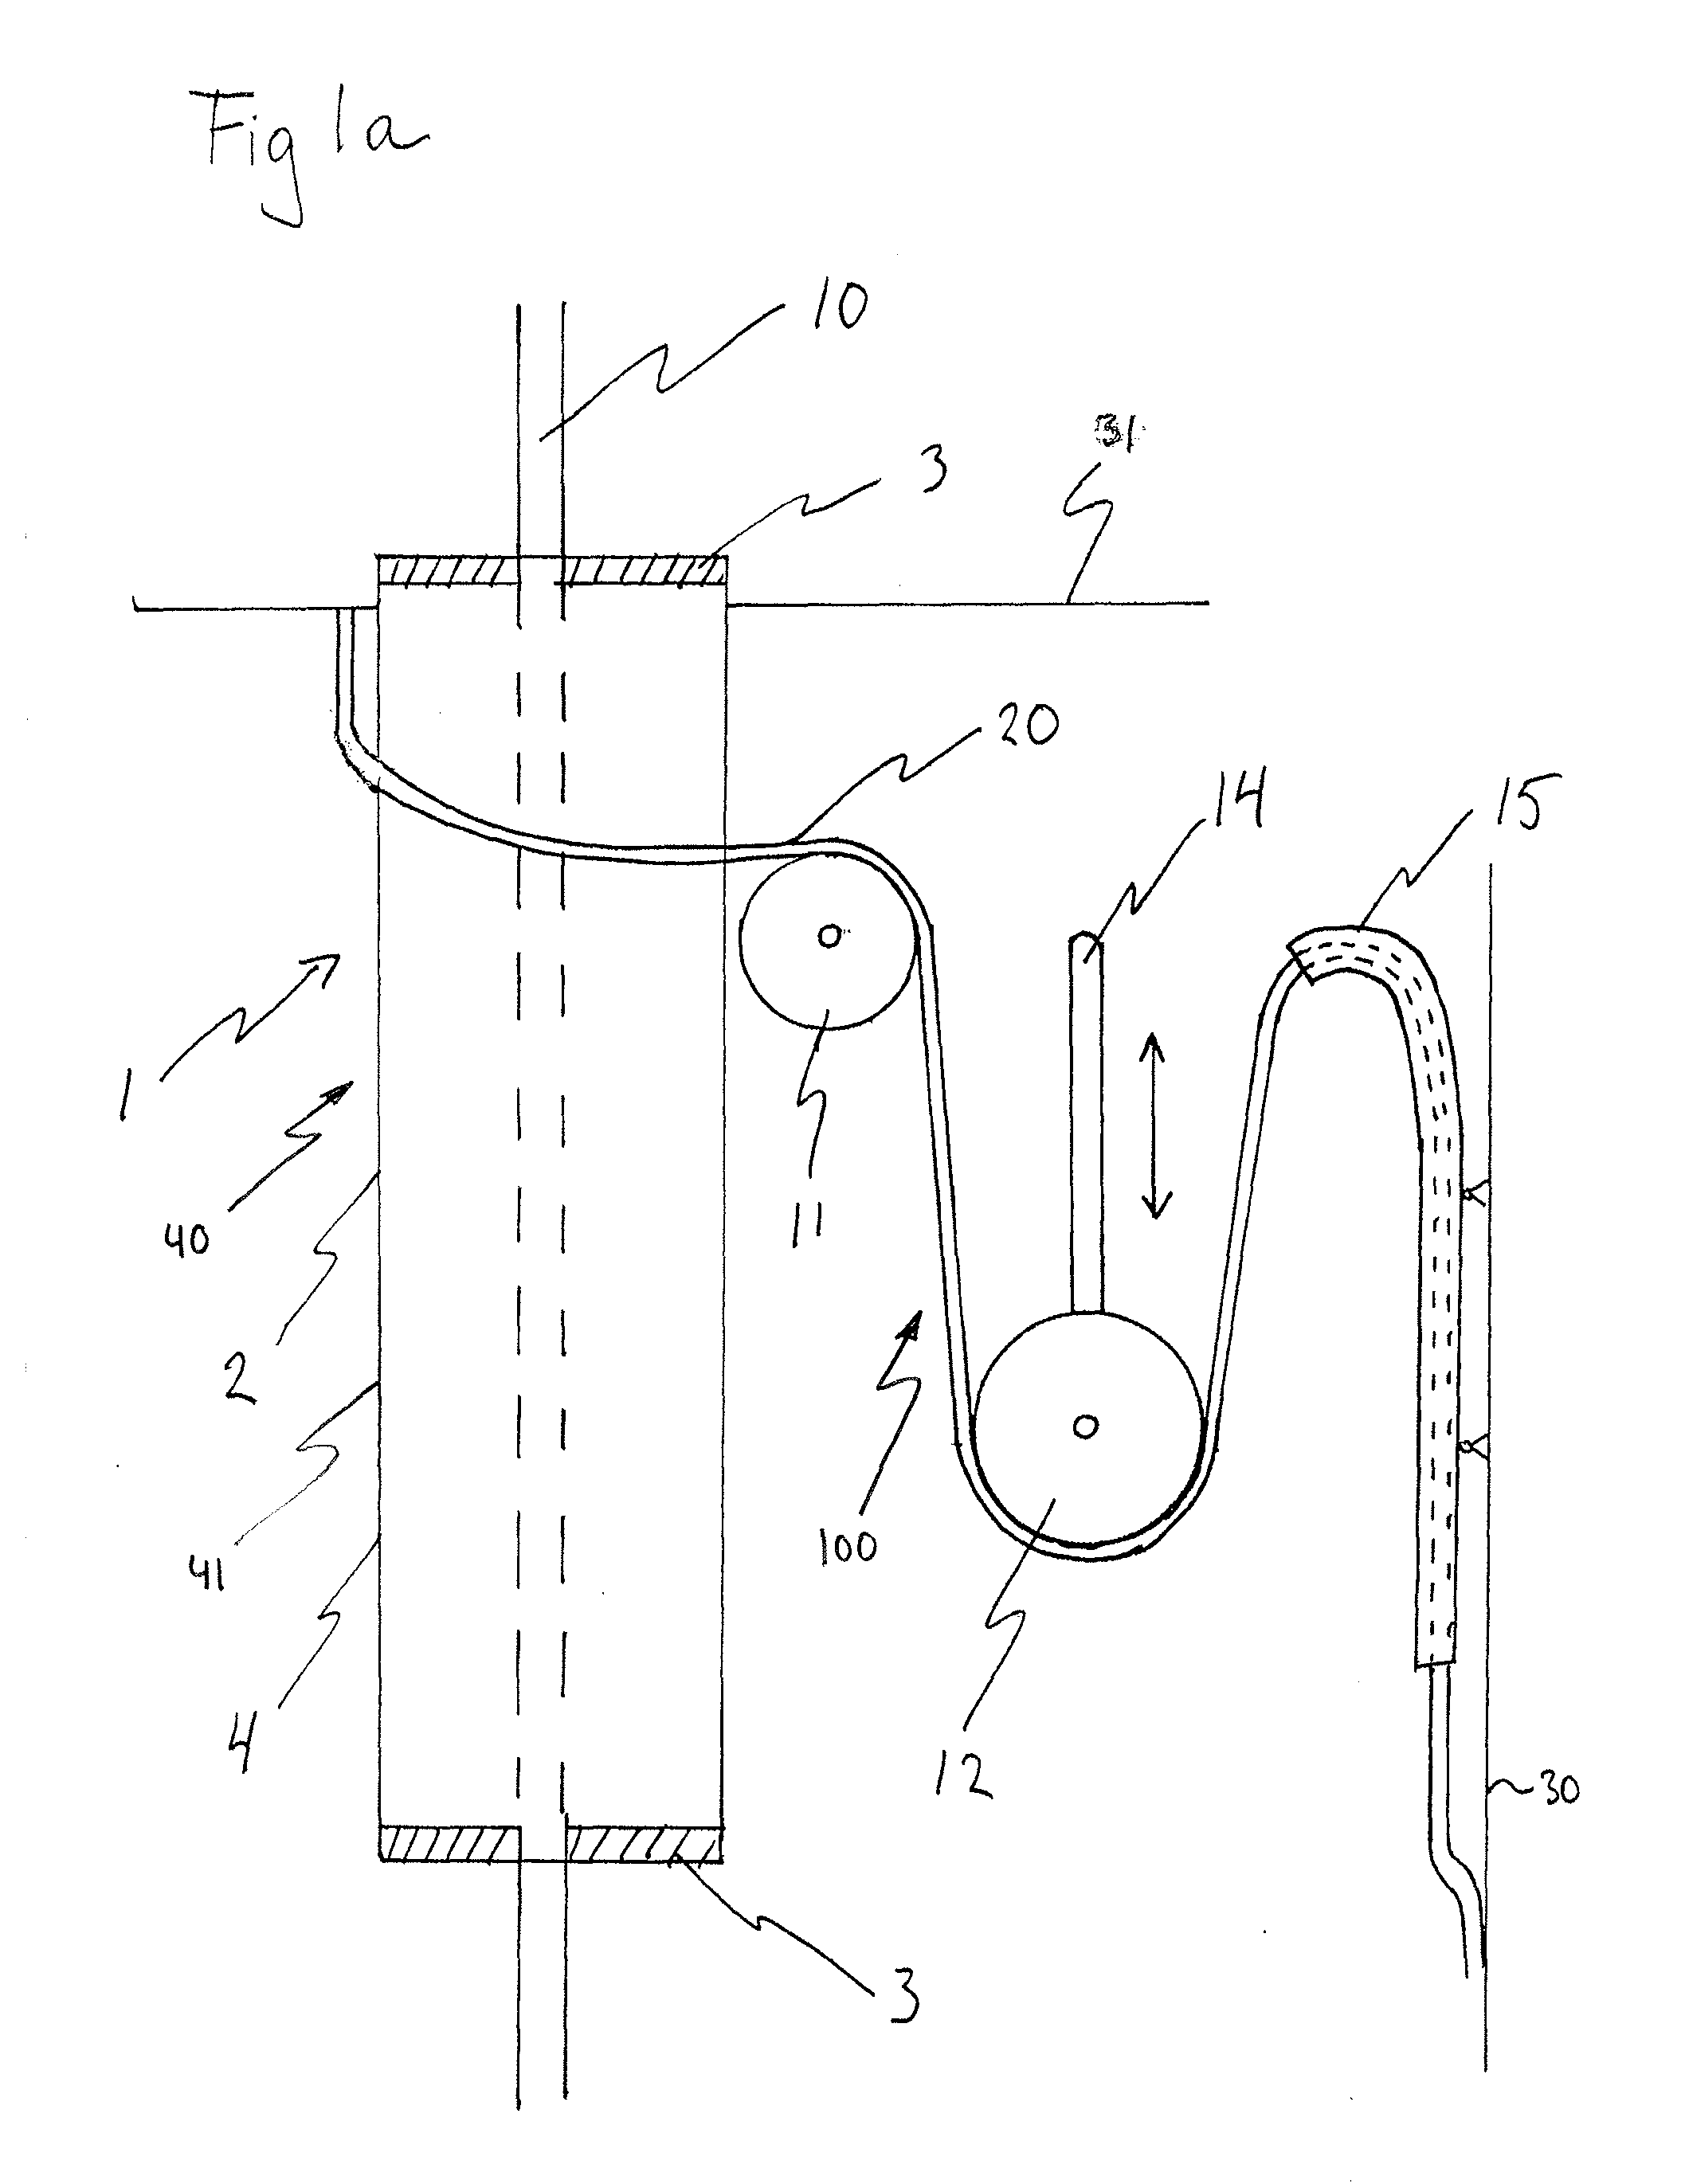 Arrangement for cable guiding and a wind turbine using such arrangement